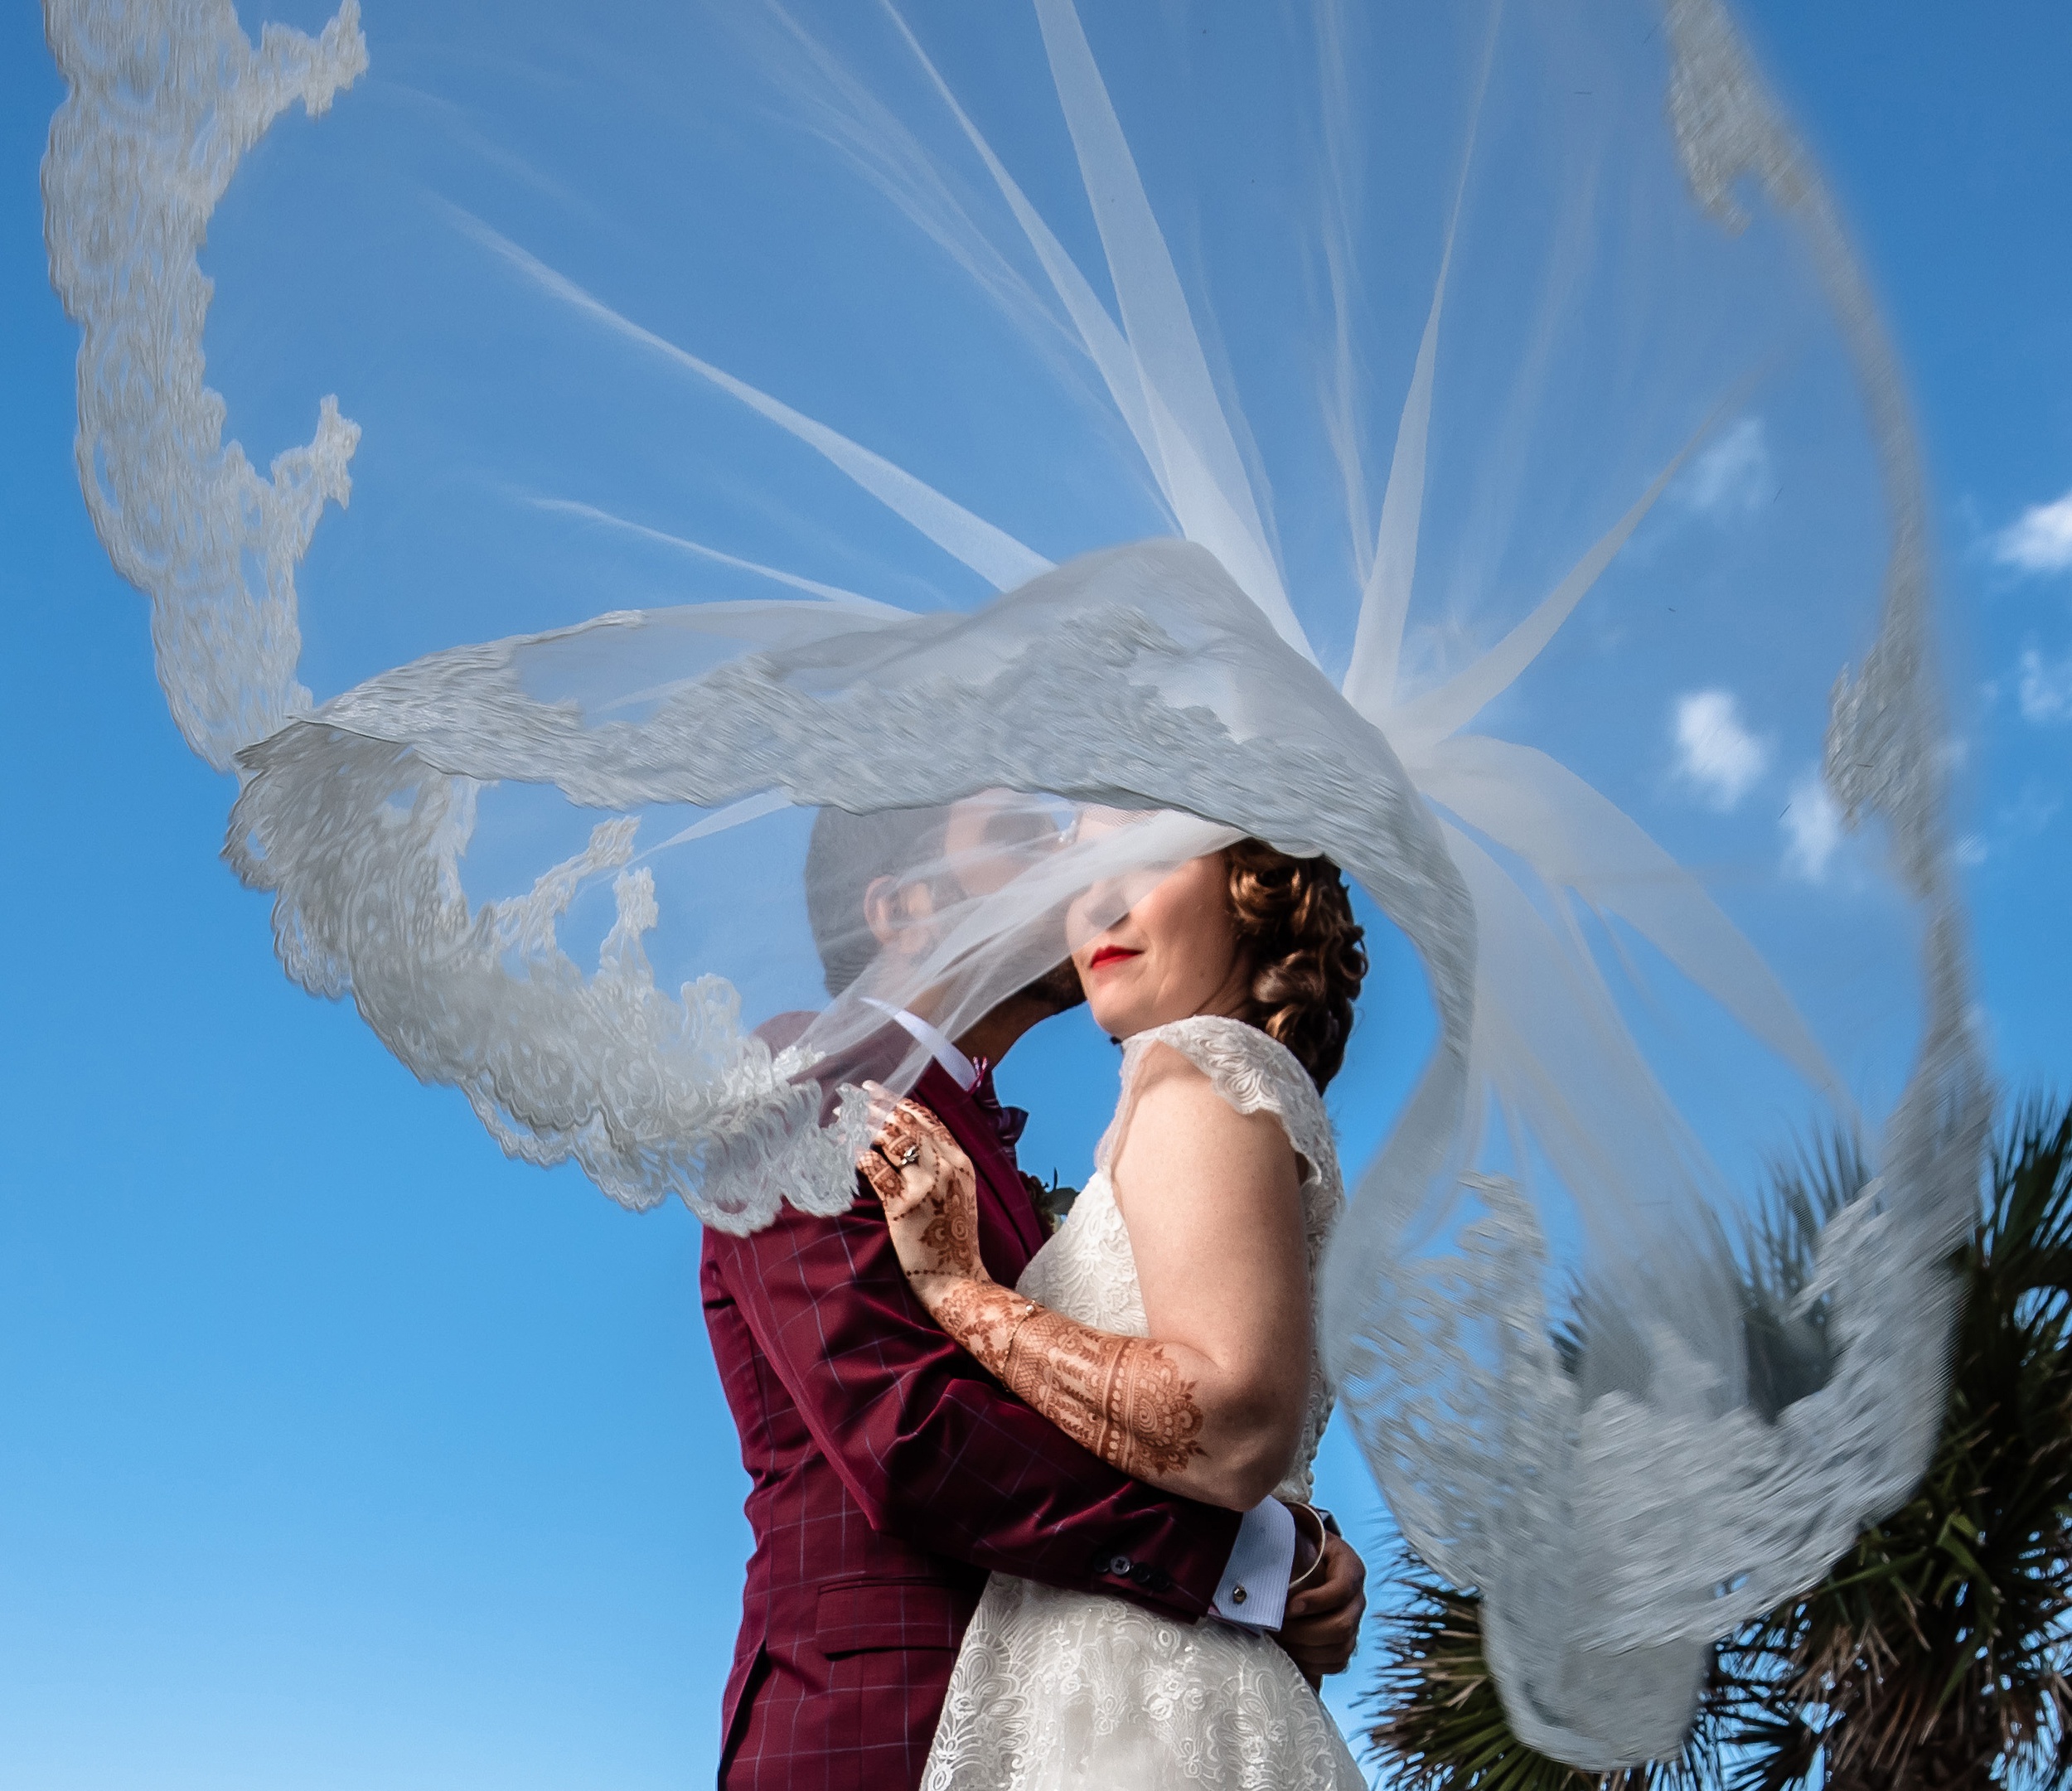 Newlyweds twirl while dancing under blue skies as the veil spins at their historic venue 1902 wedding